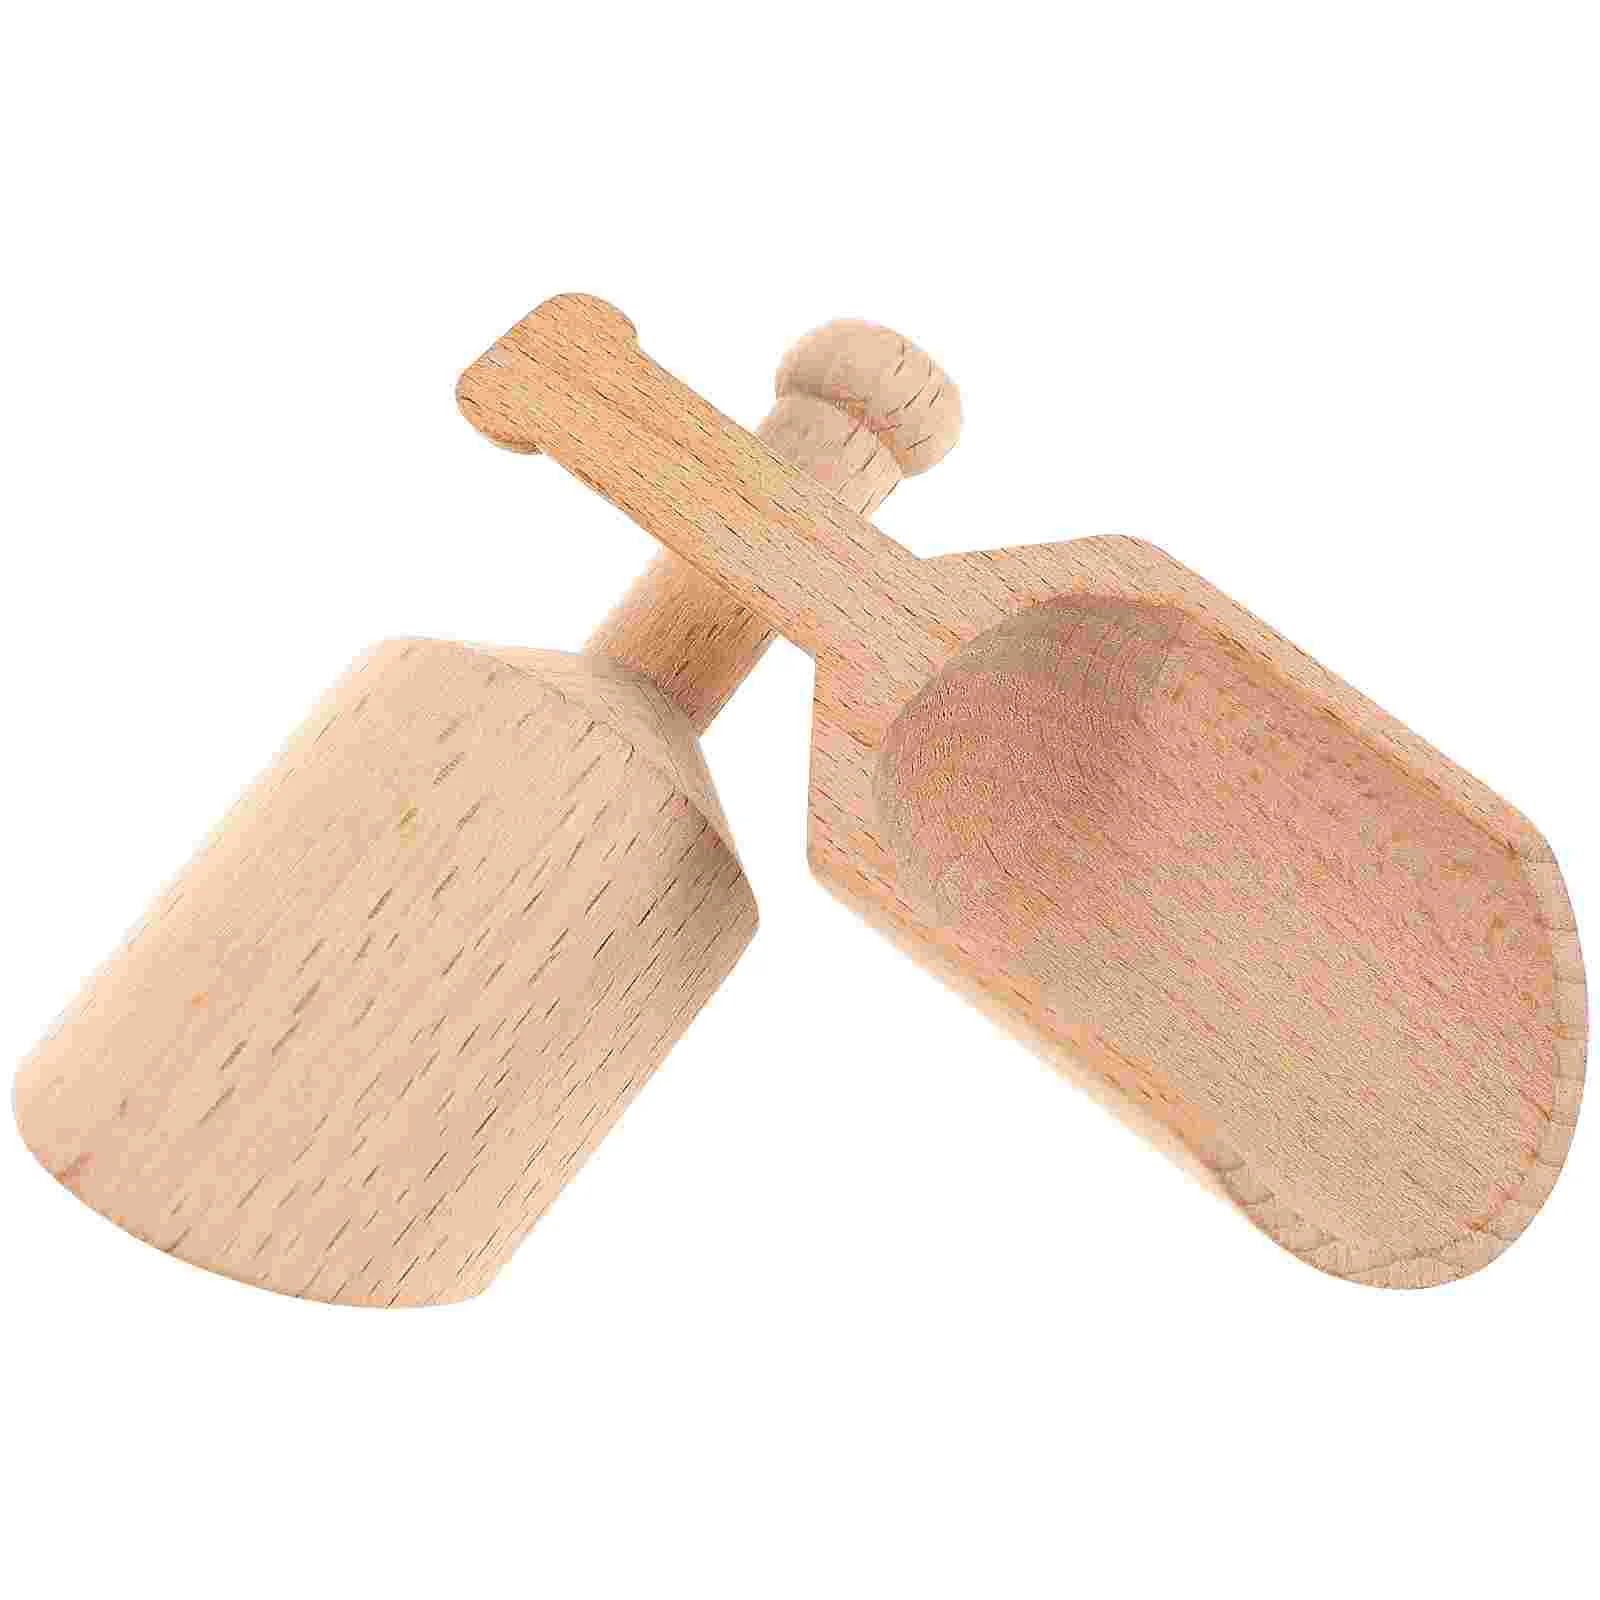 

2 Nature Practical Useful Lightweight Spoons Bath Salt Spoons Spoon for Candy Bath Salts